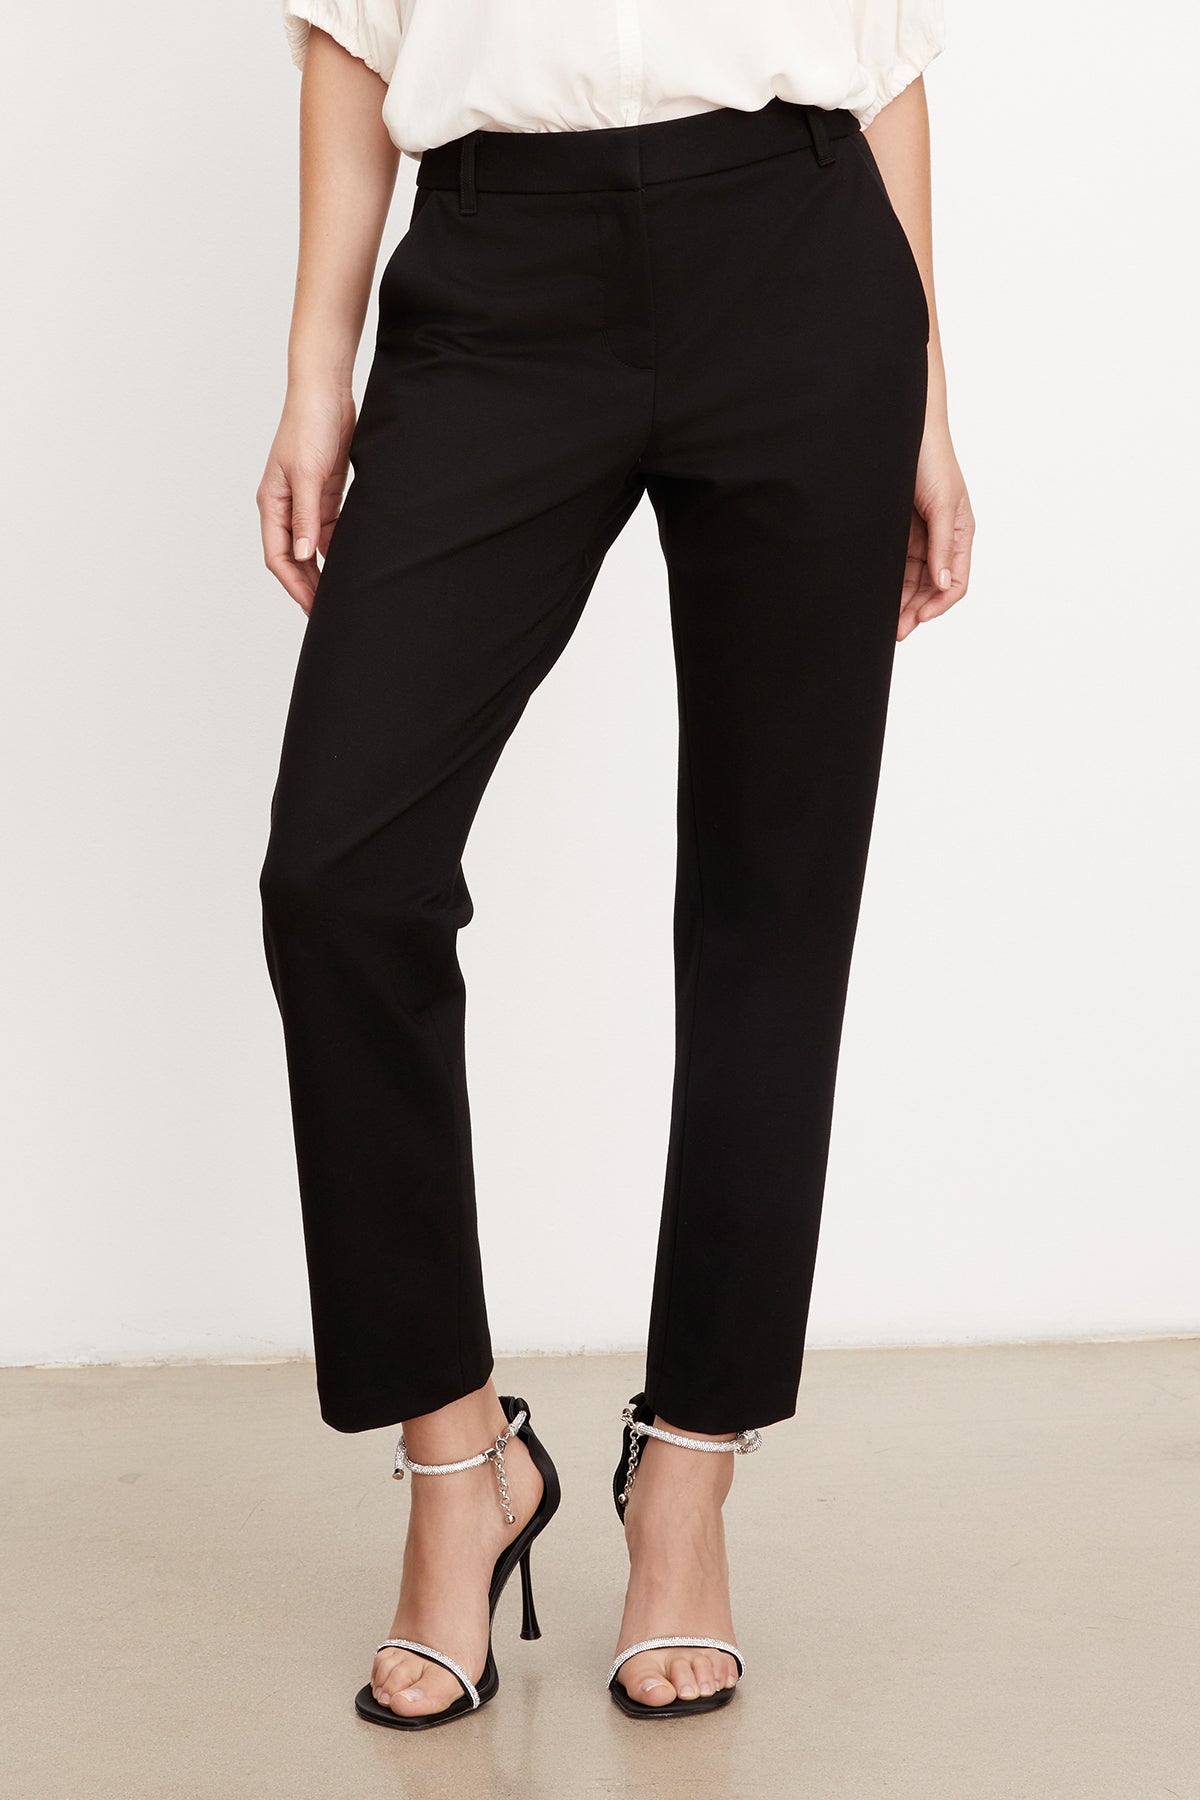 A woman wearing Velvet by Graham & Spencer's JAY PONTI STRAIGHT LEG PANT, made of ponti fabric.-35577760972993